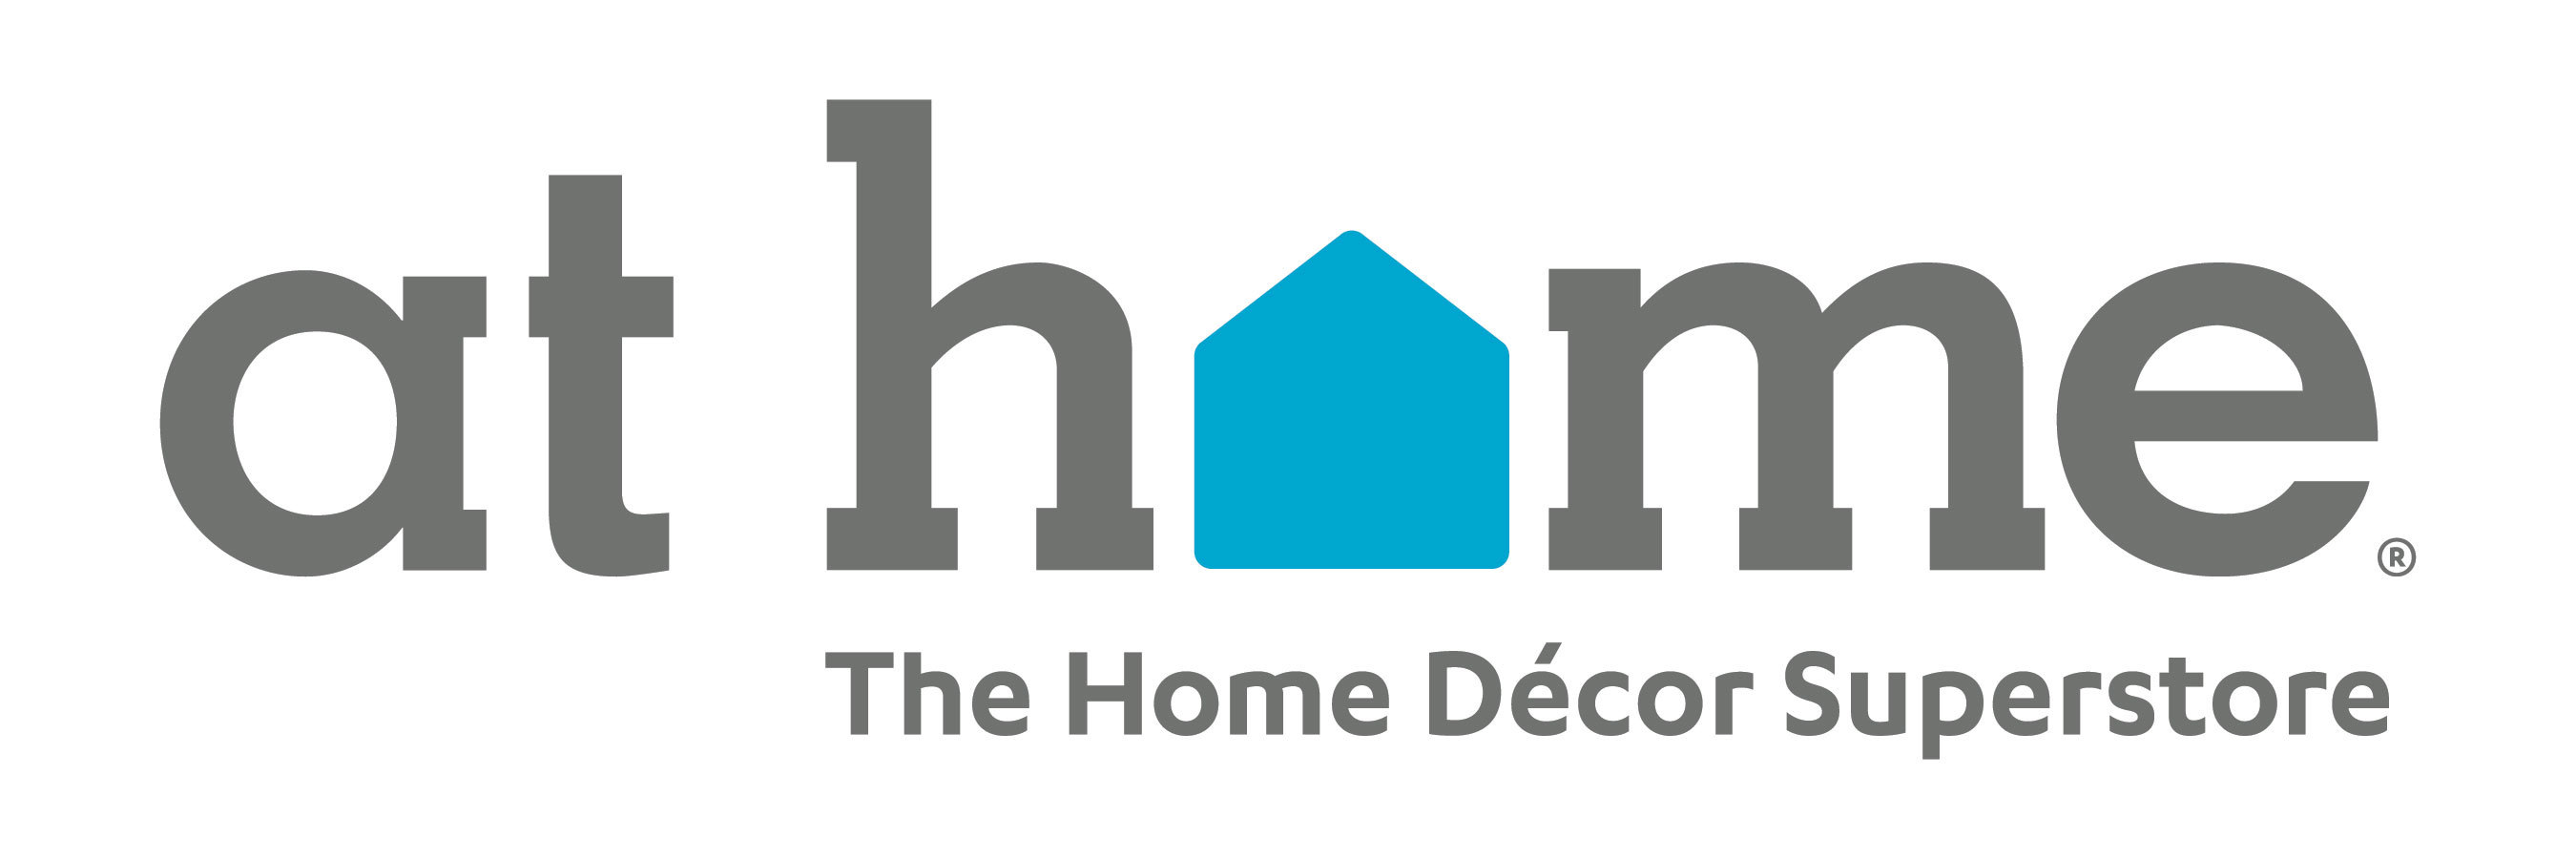 Shop at home the decor superstore for the best home decor options ...